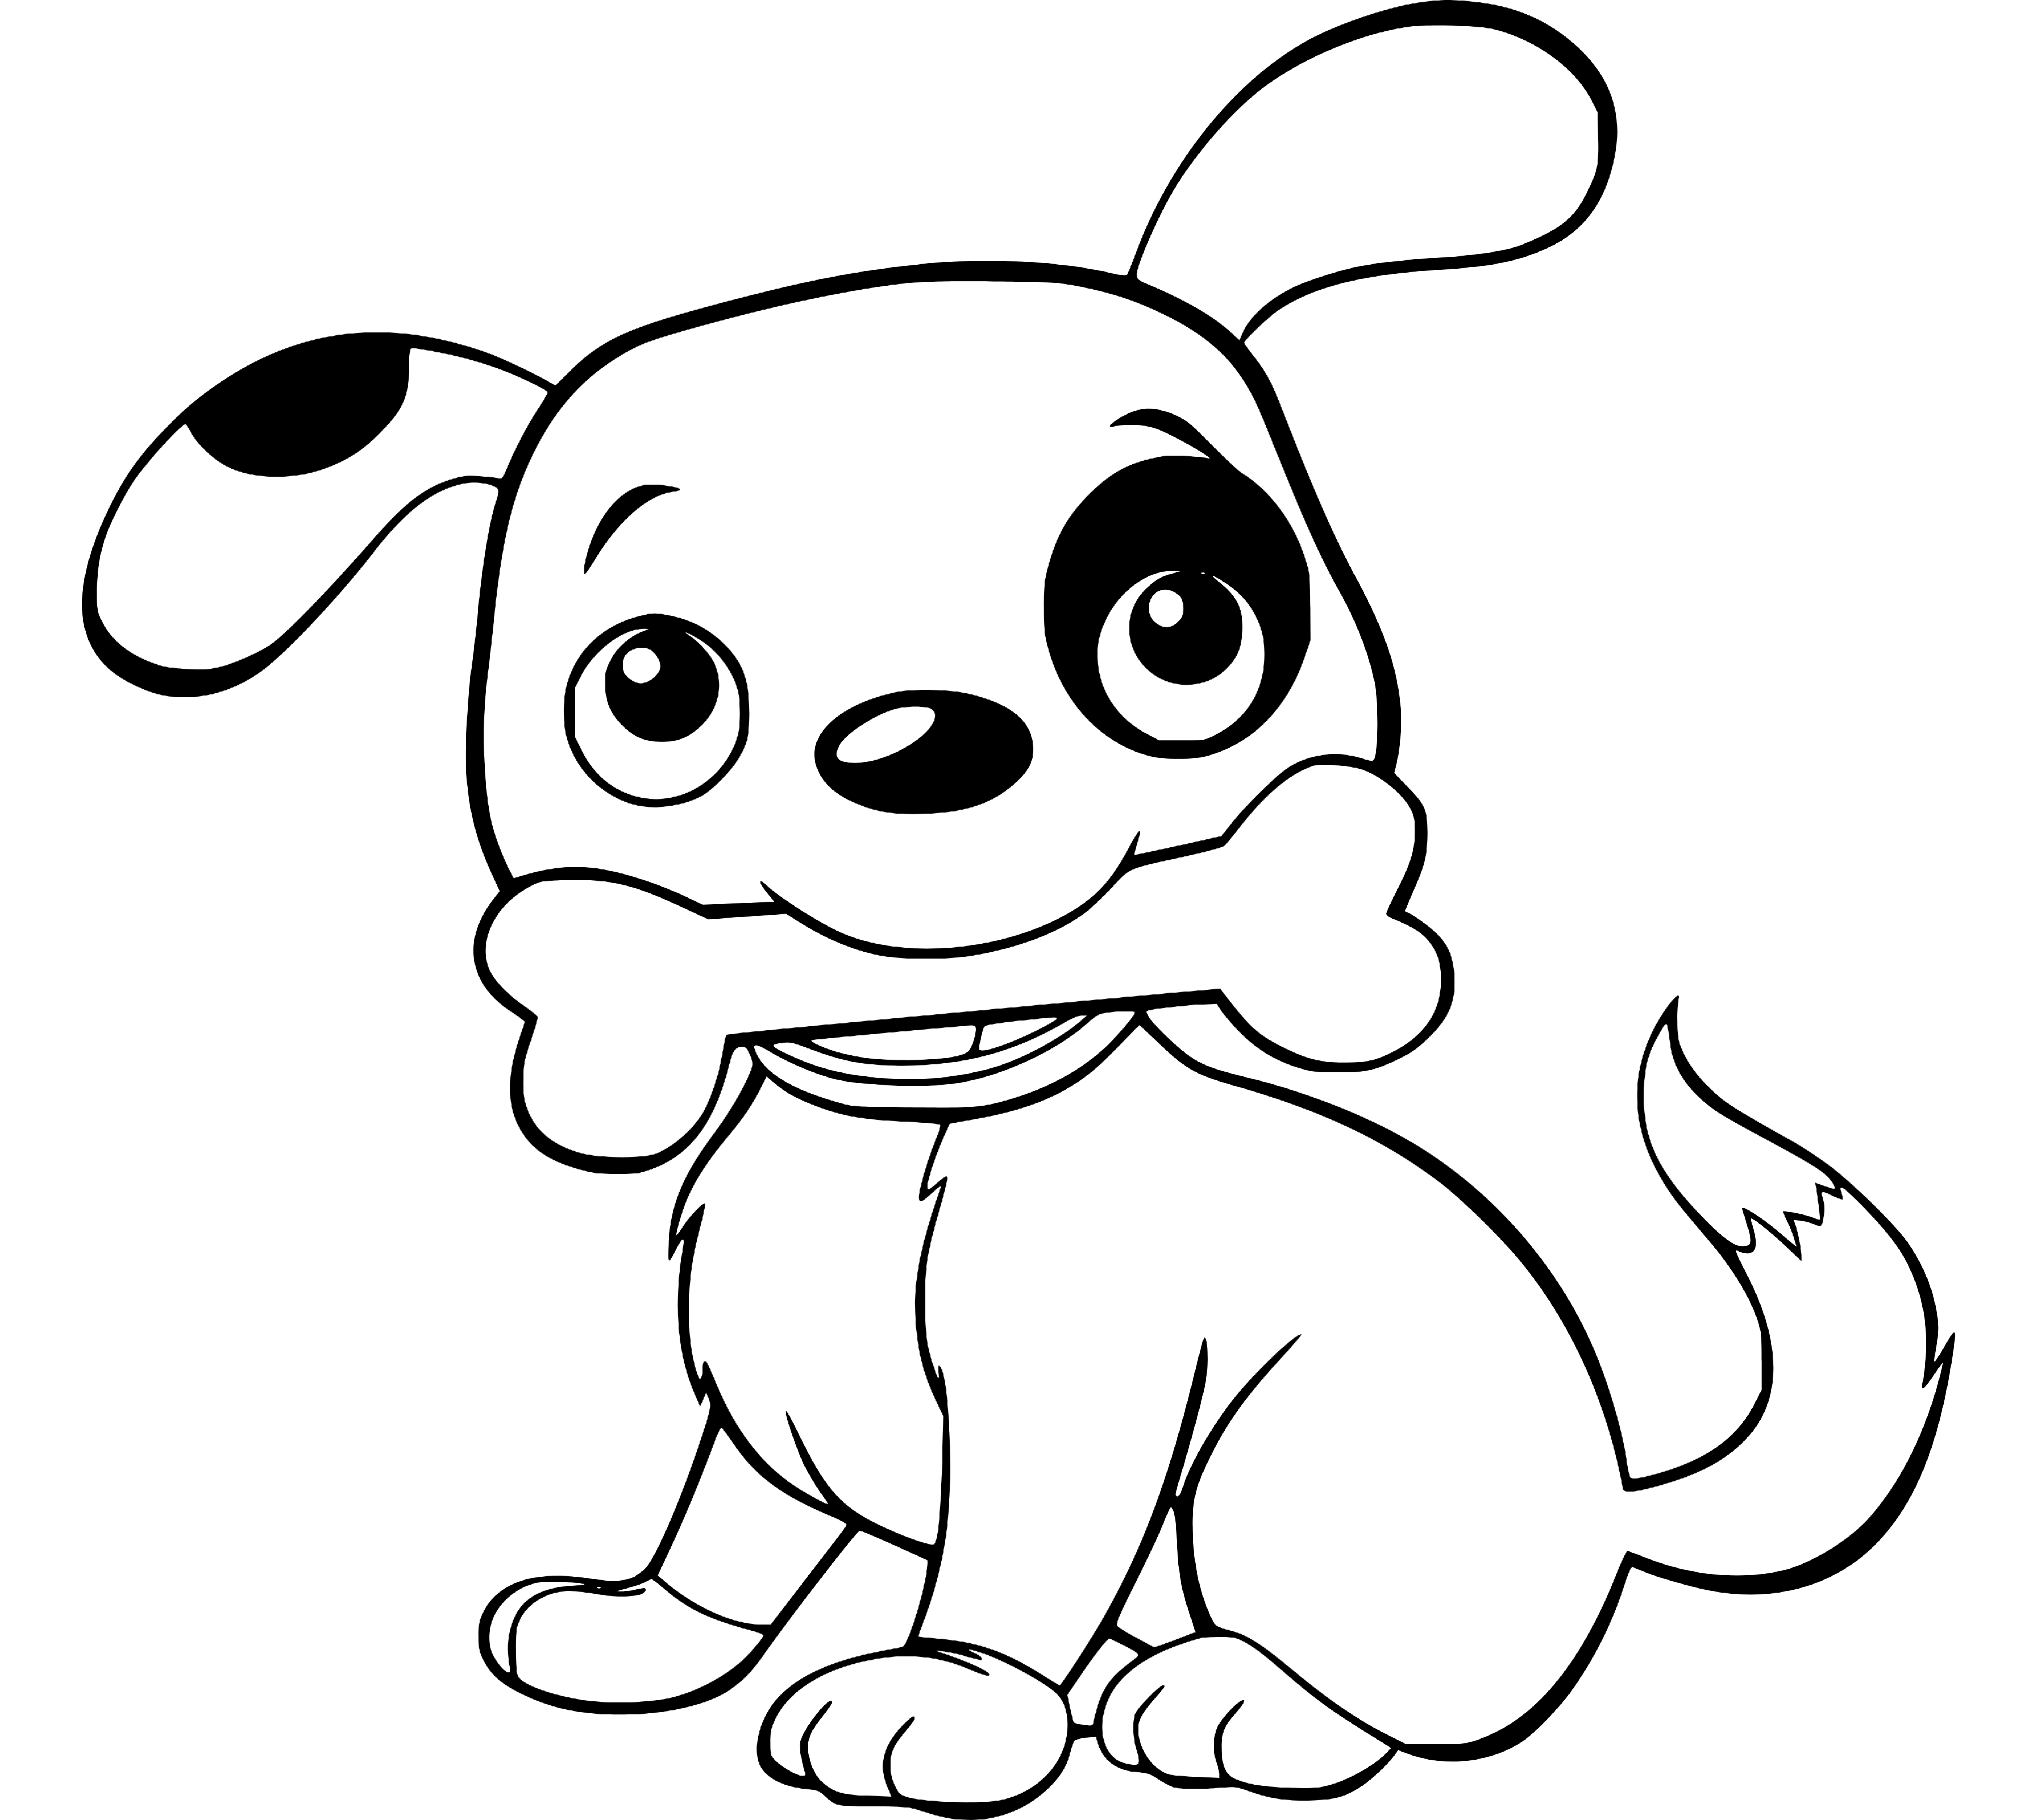 Printable Puppy eating bone Coloring Page for kids.